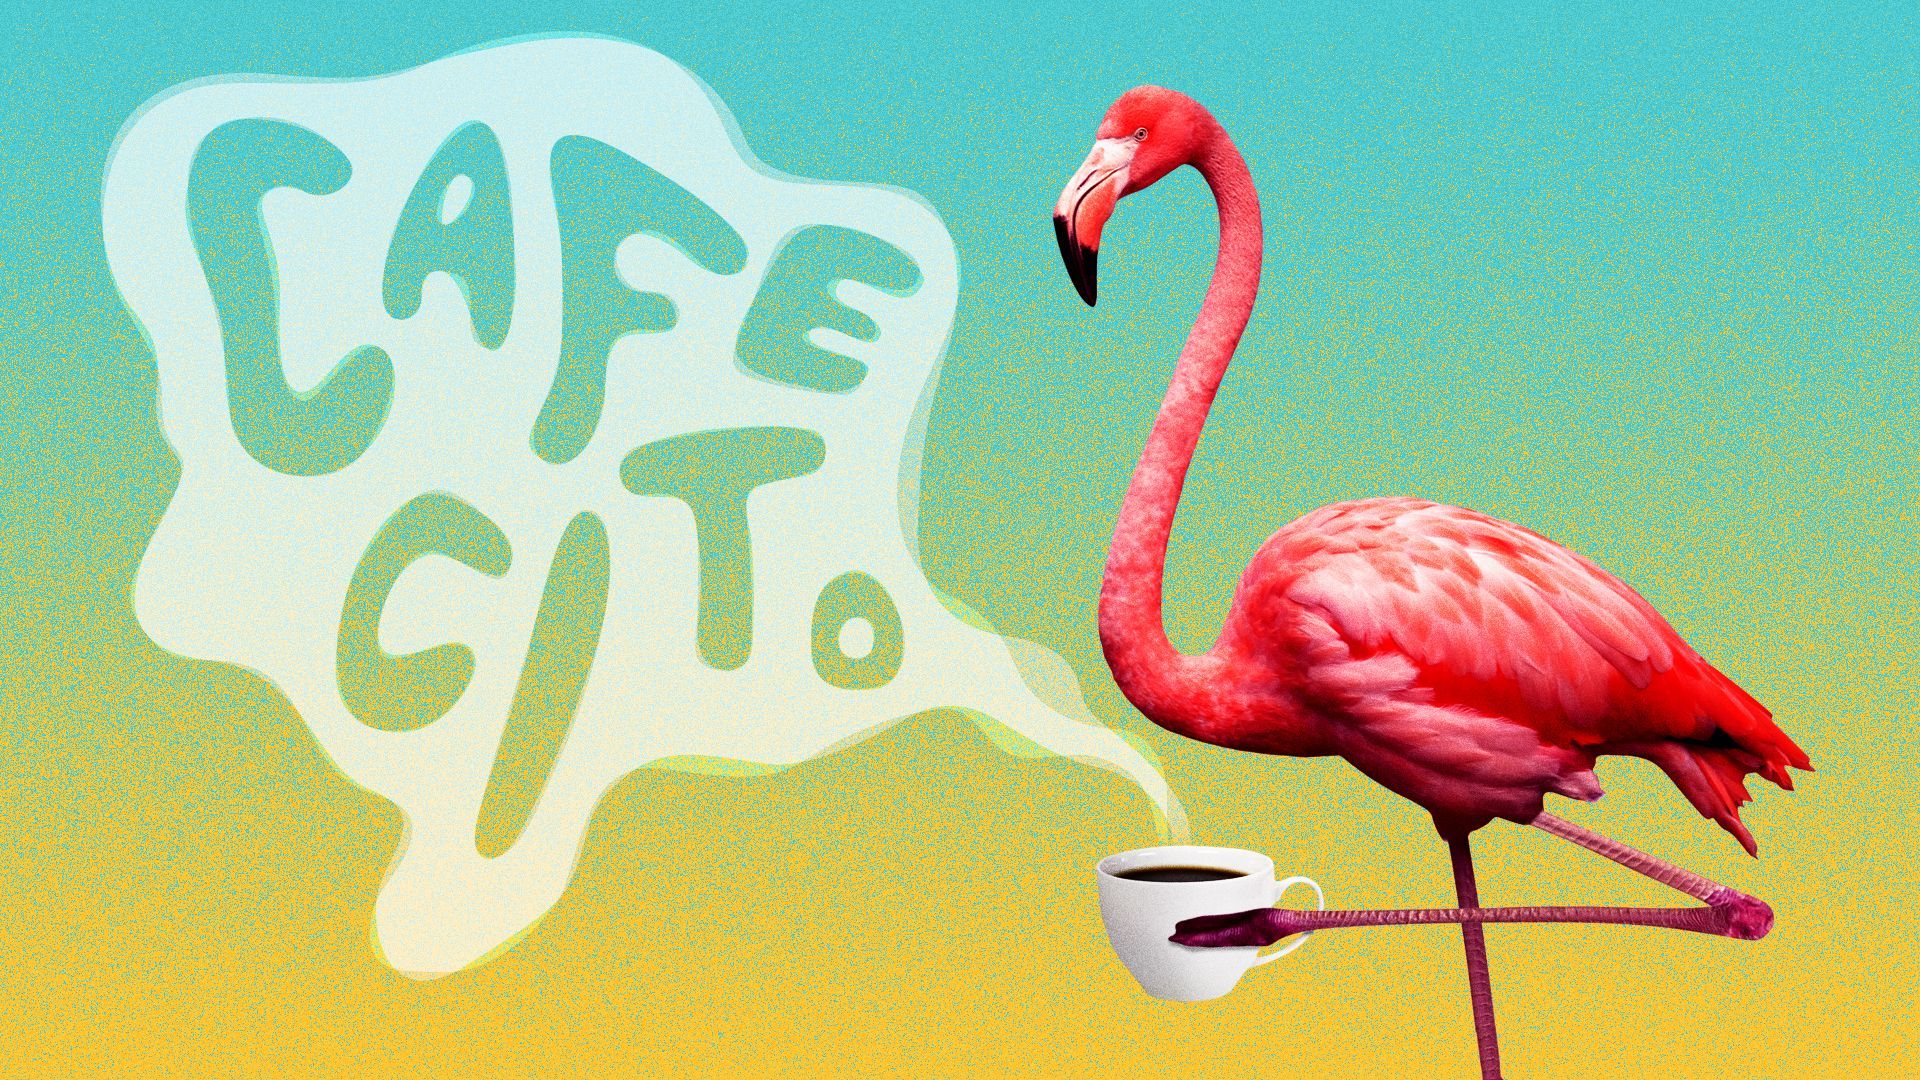 Illustration of a flamingo holding a cup of coffee, with the steam spelling "Cafecito."